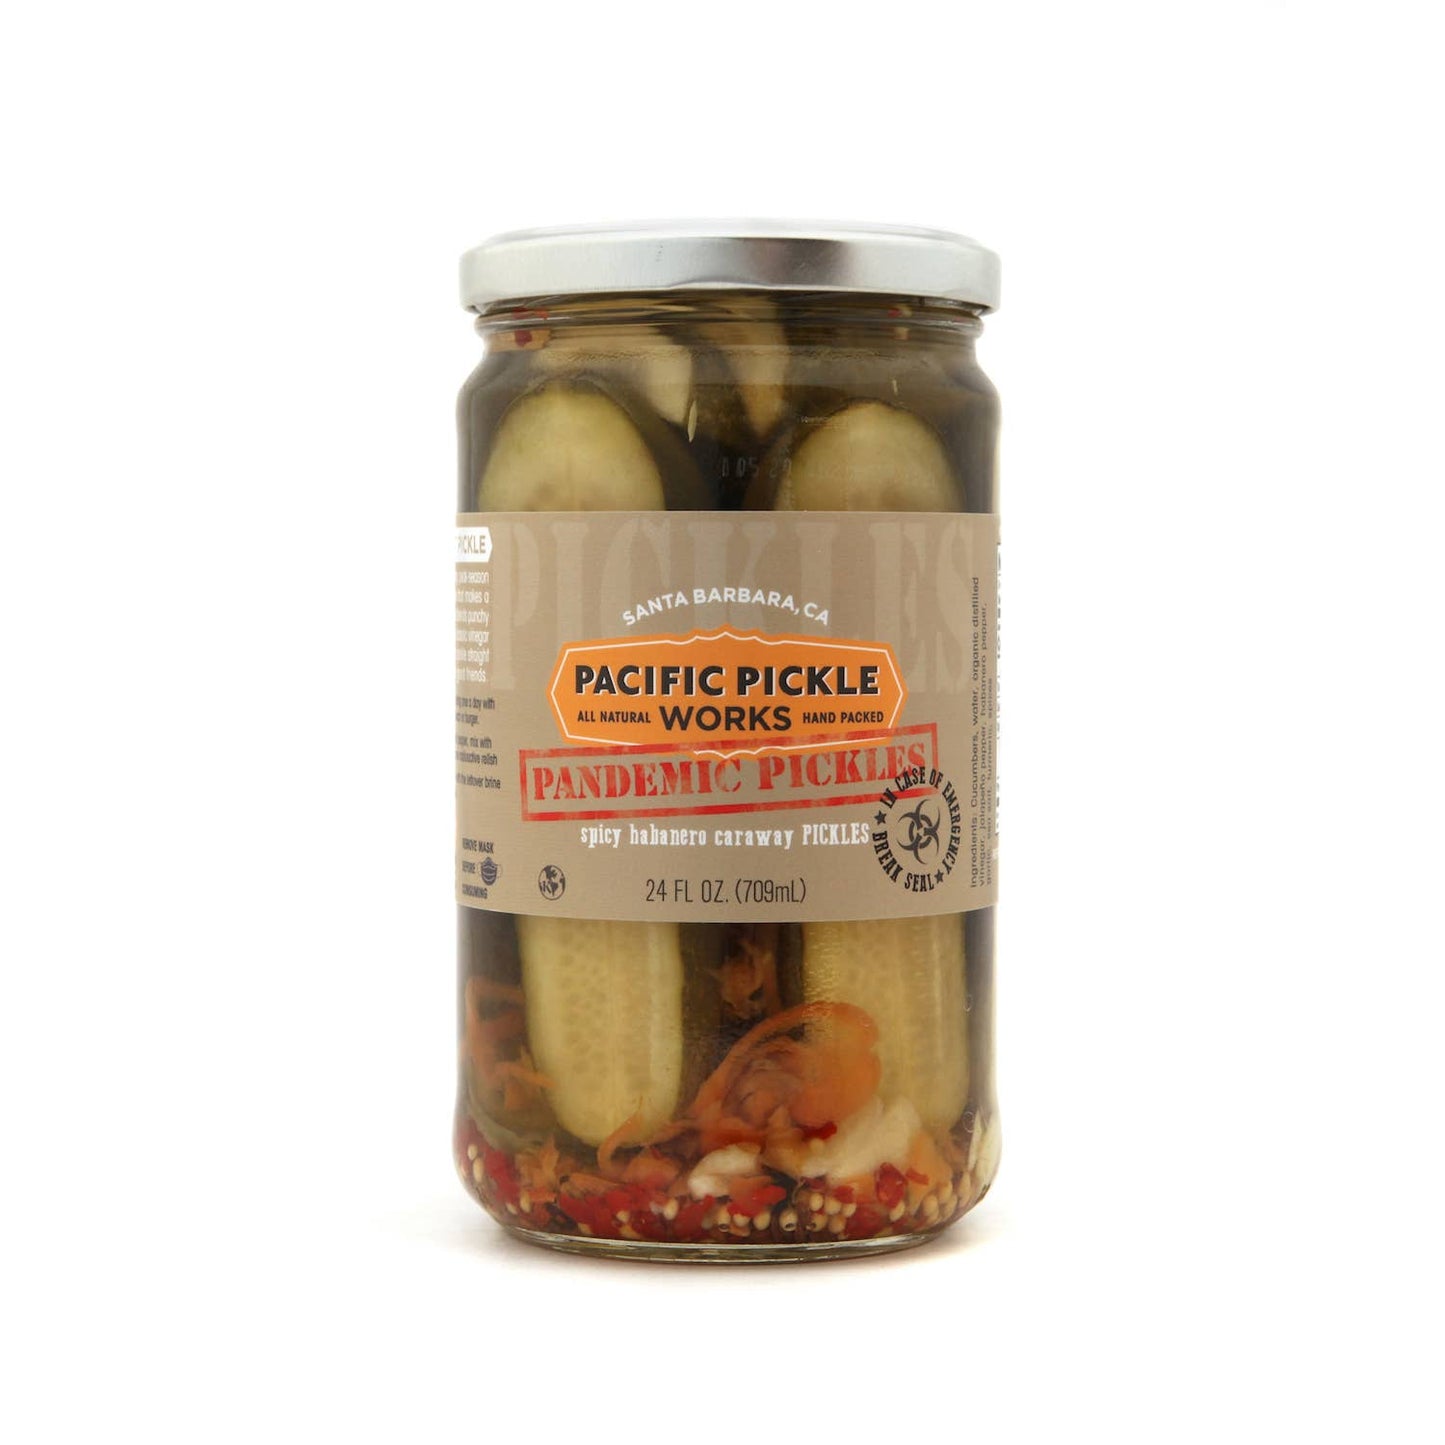 Pacific Pickle Works - Pandemic Pickles